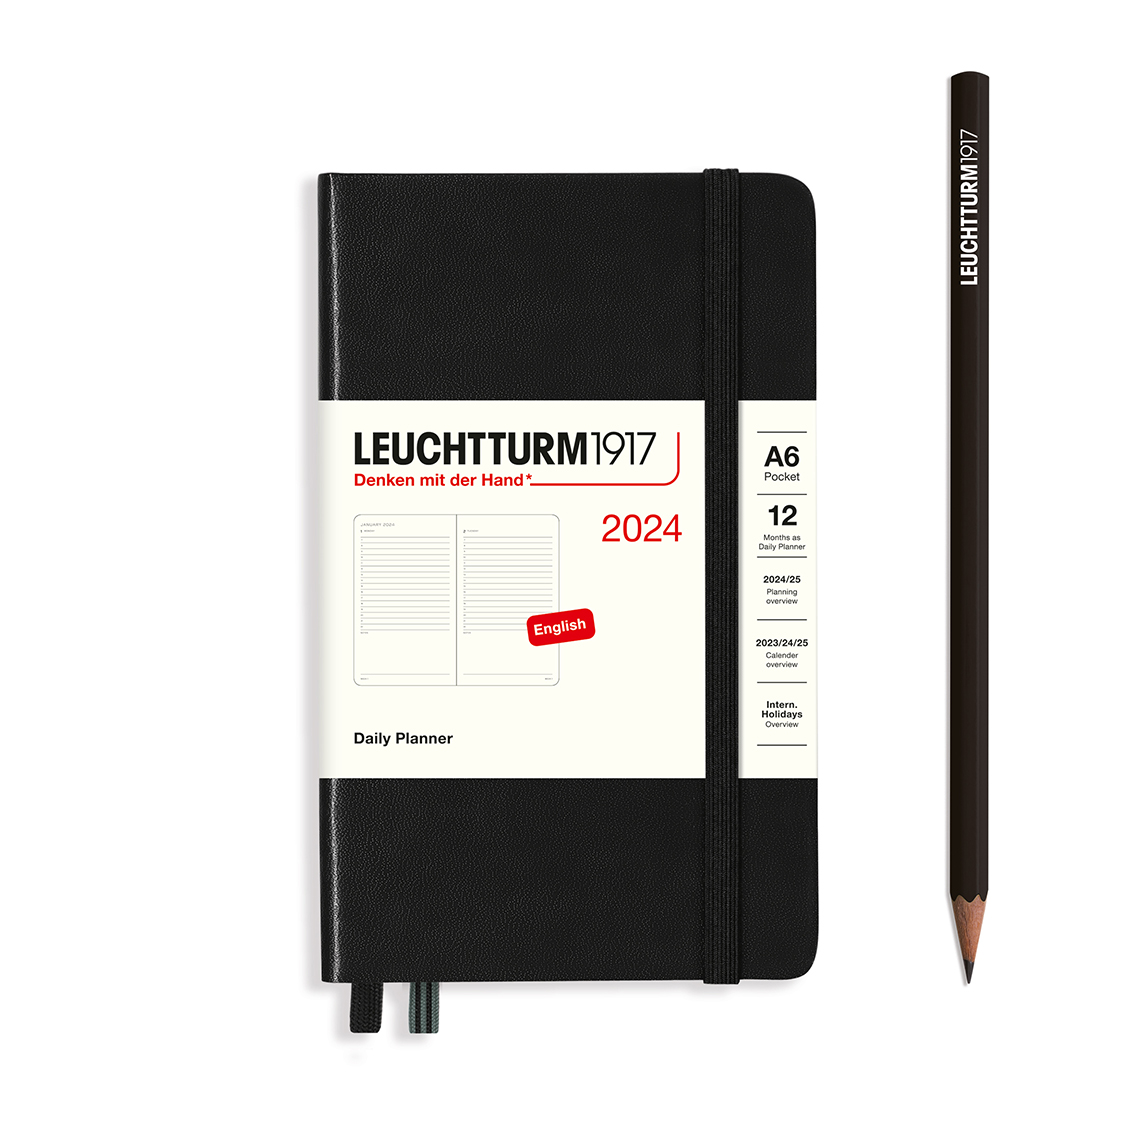 Leuchtturm1917 Daily Planner Hard Cover Pocket A6 2024 - Pencraft the boutique